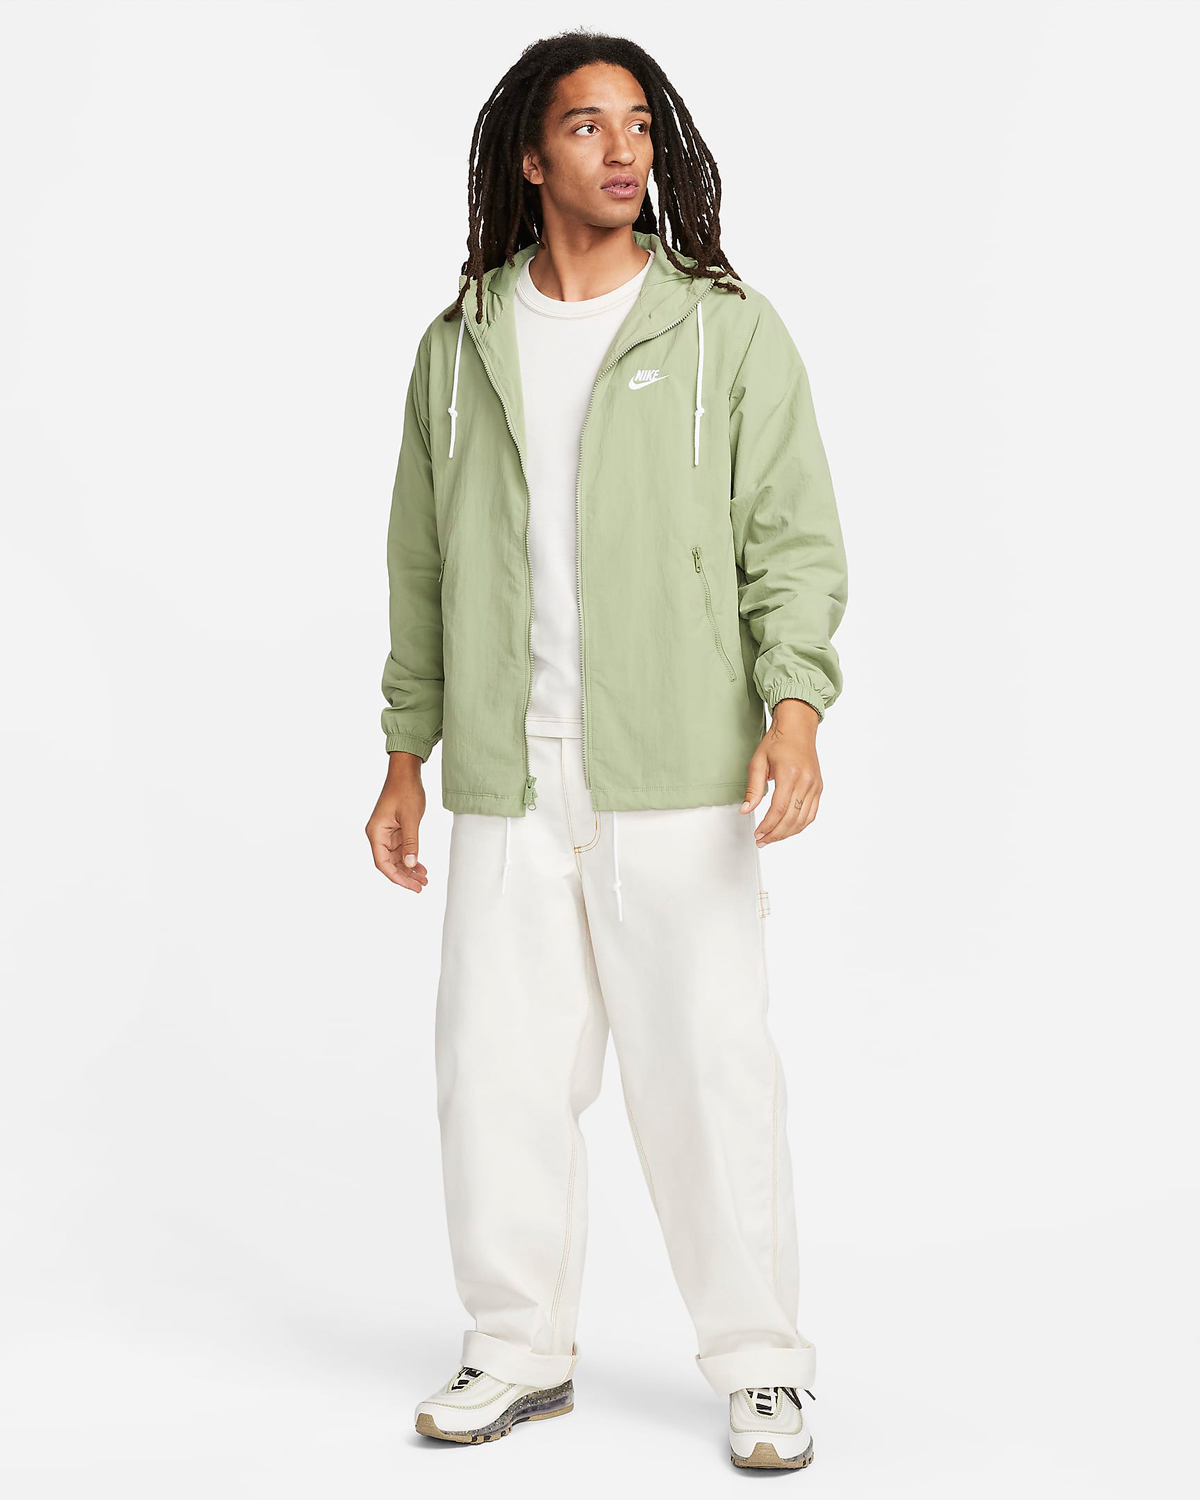 Nike-Club-Woven-Jacket-Oil-Green-Sneaker-Outfit